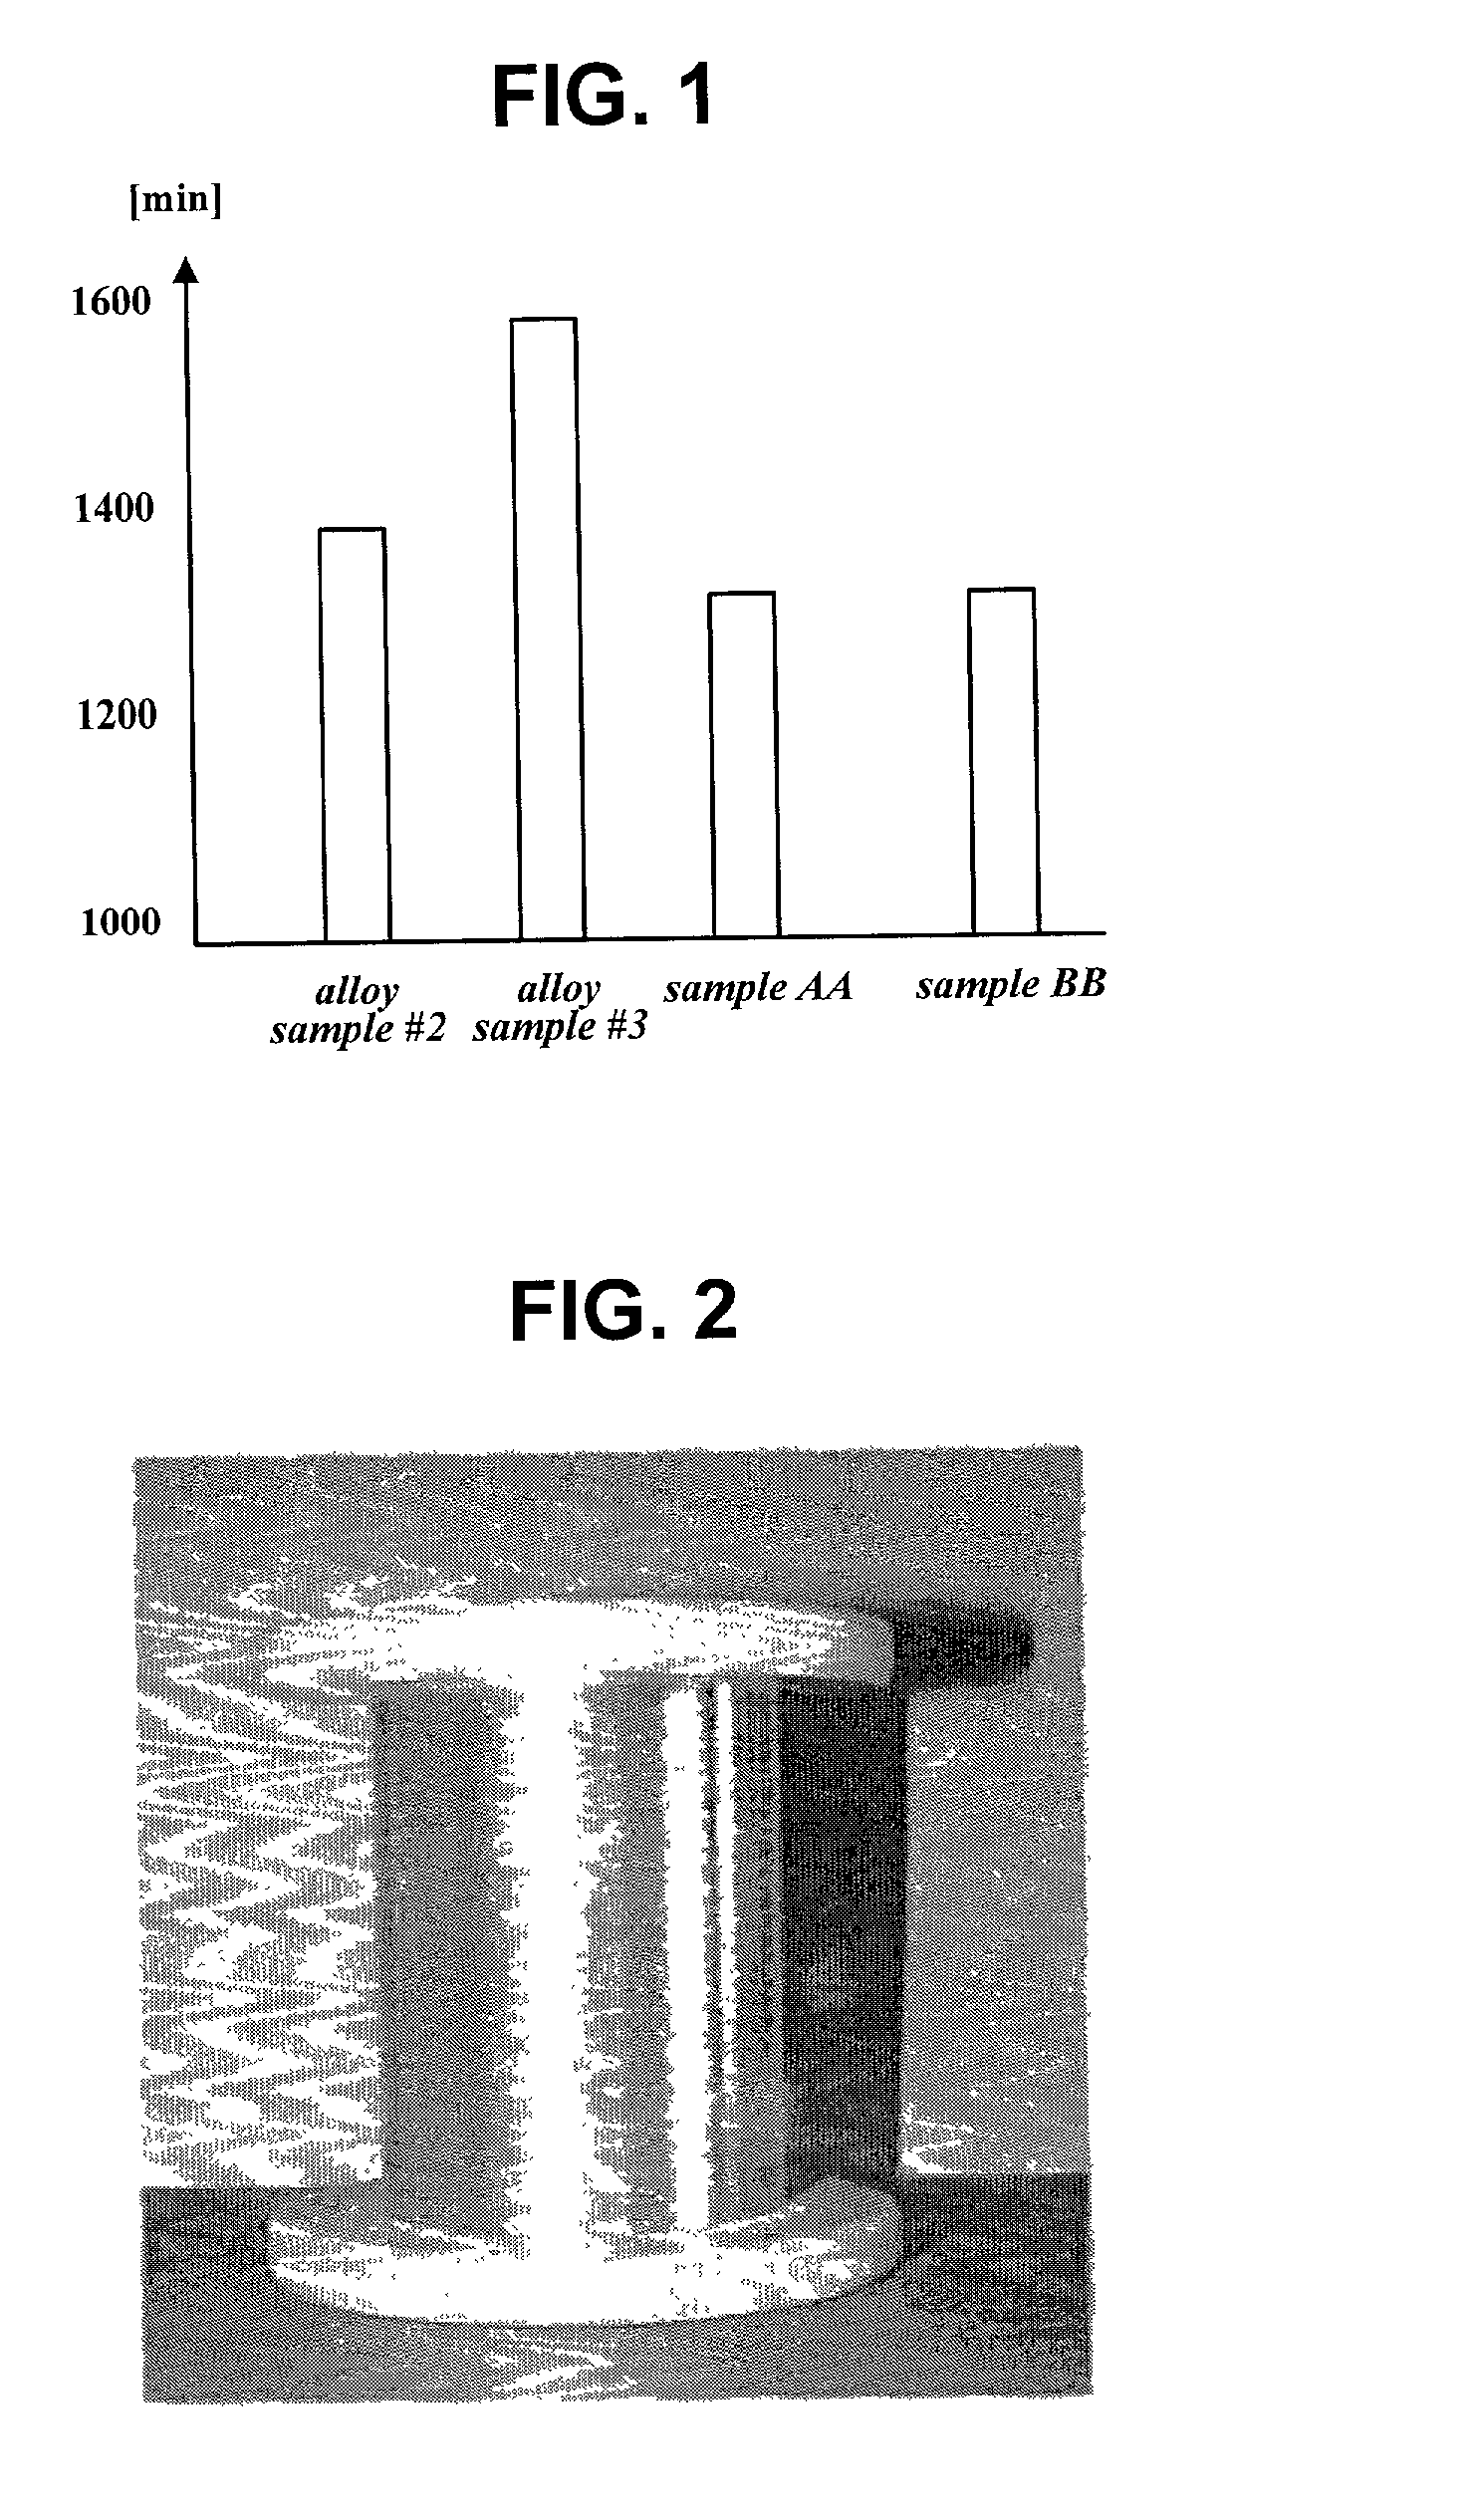 Fe-Cr-Al alloys for electric resistance wires